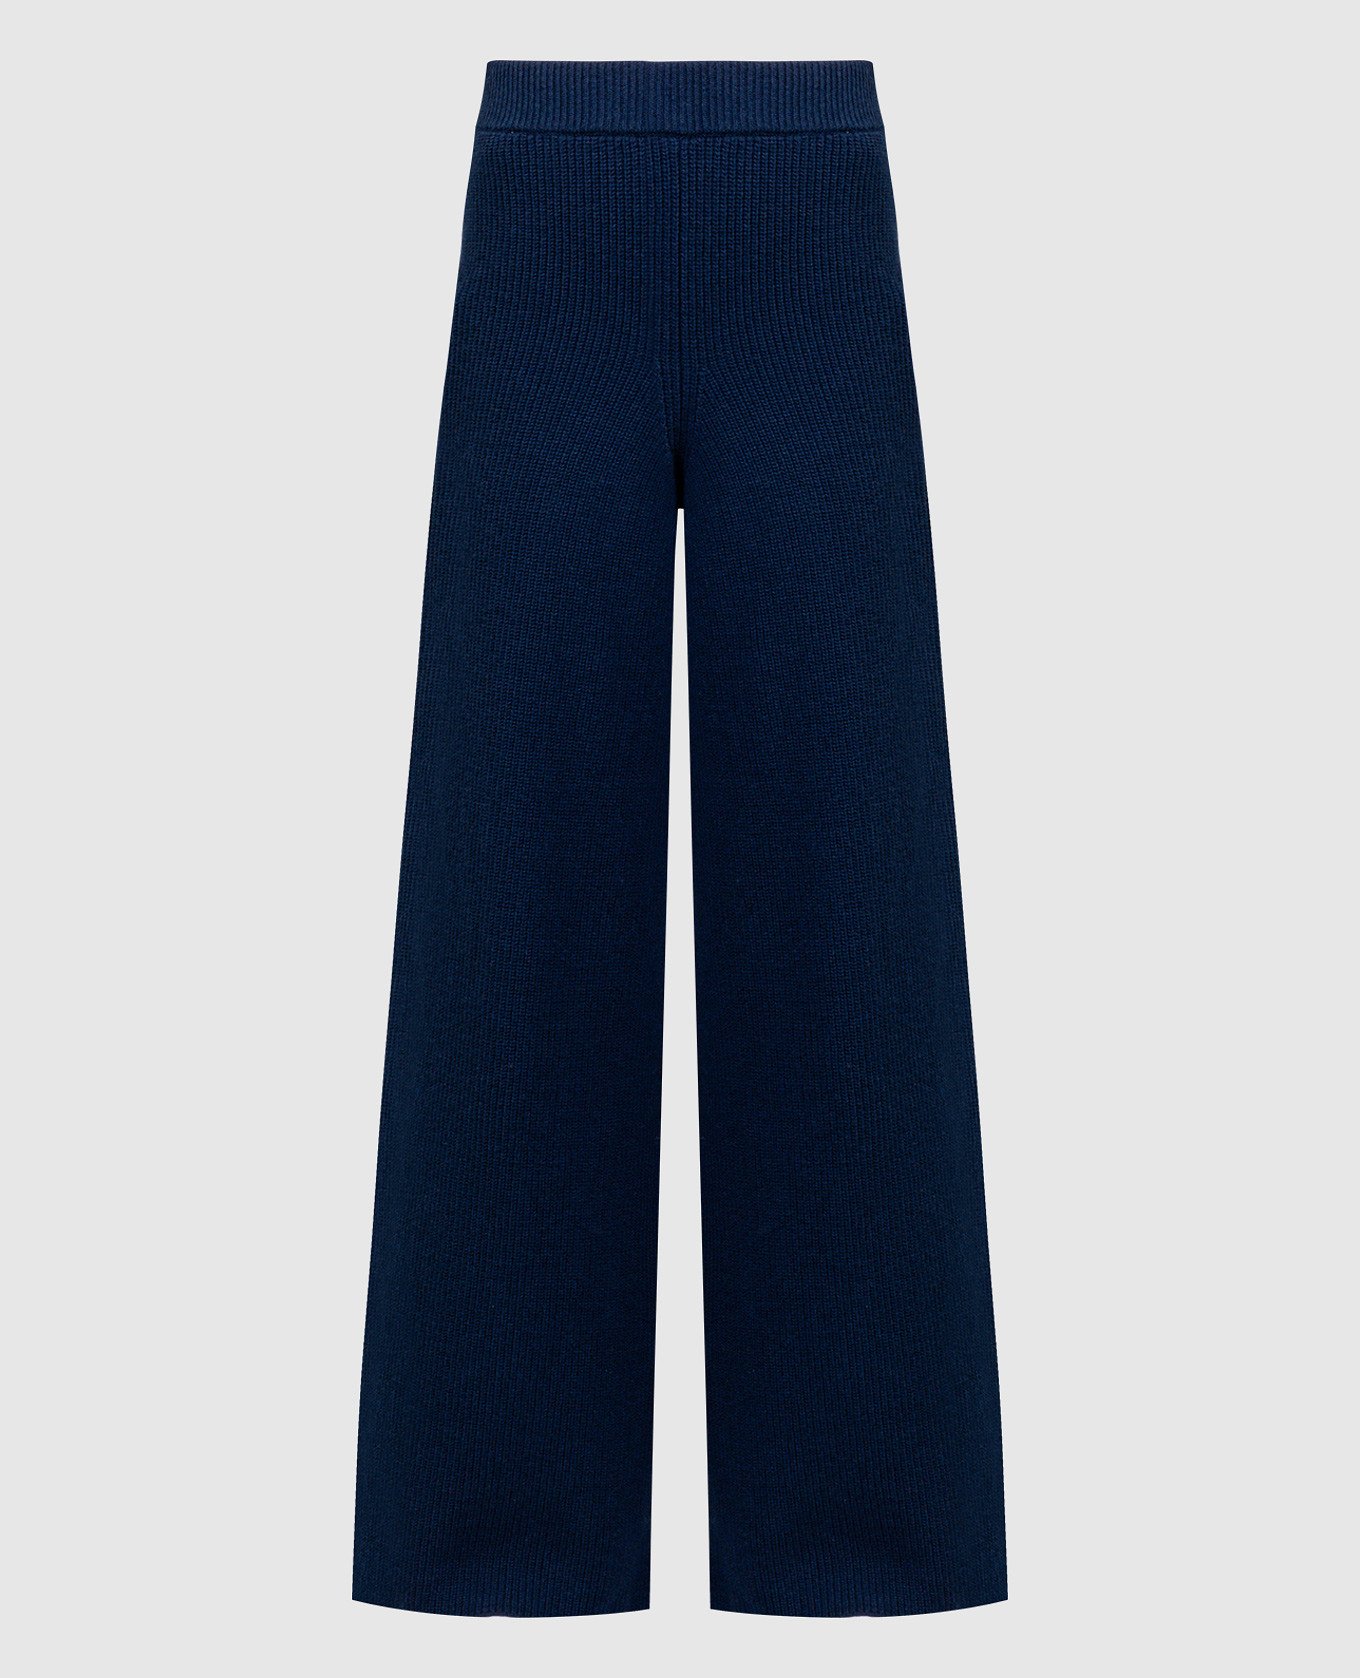 Blue wide trousers made of wool